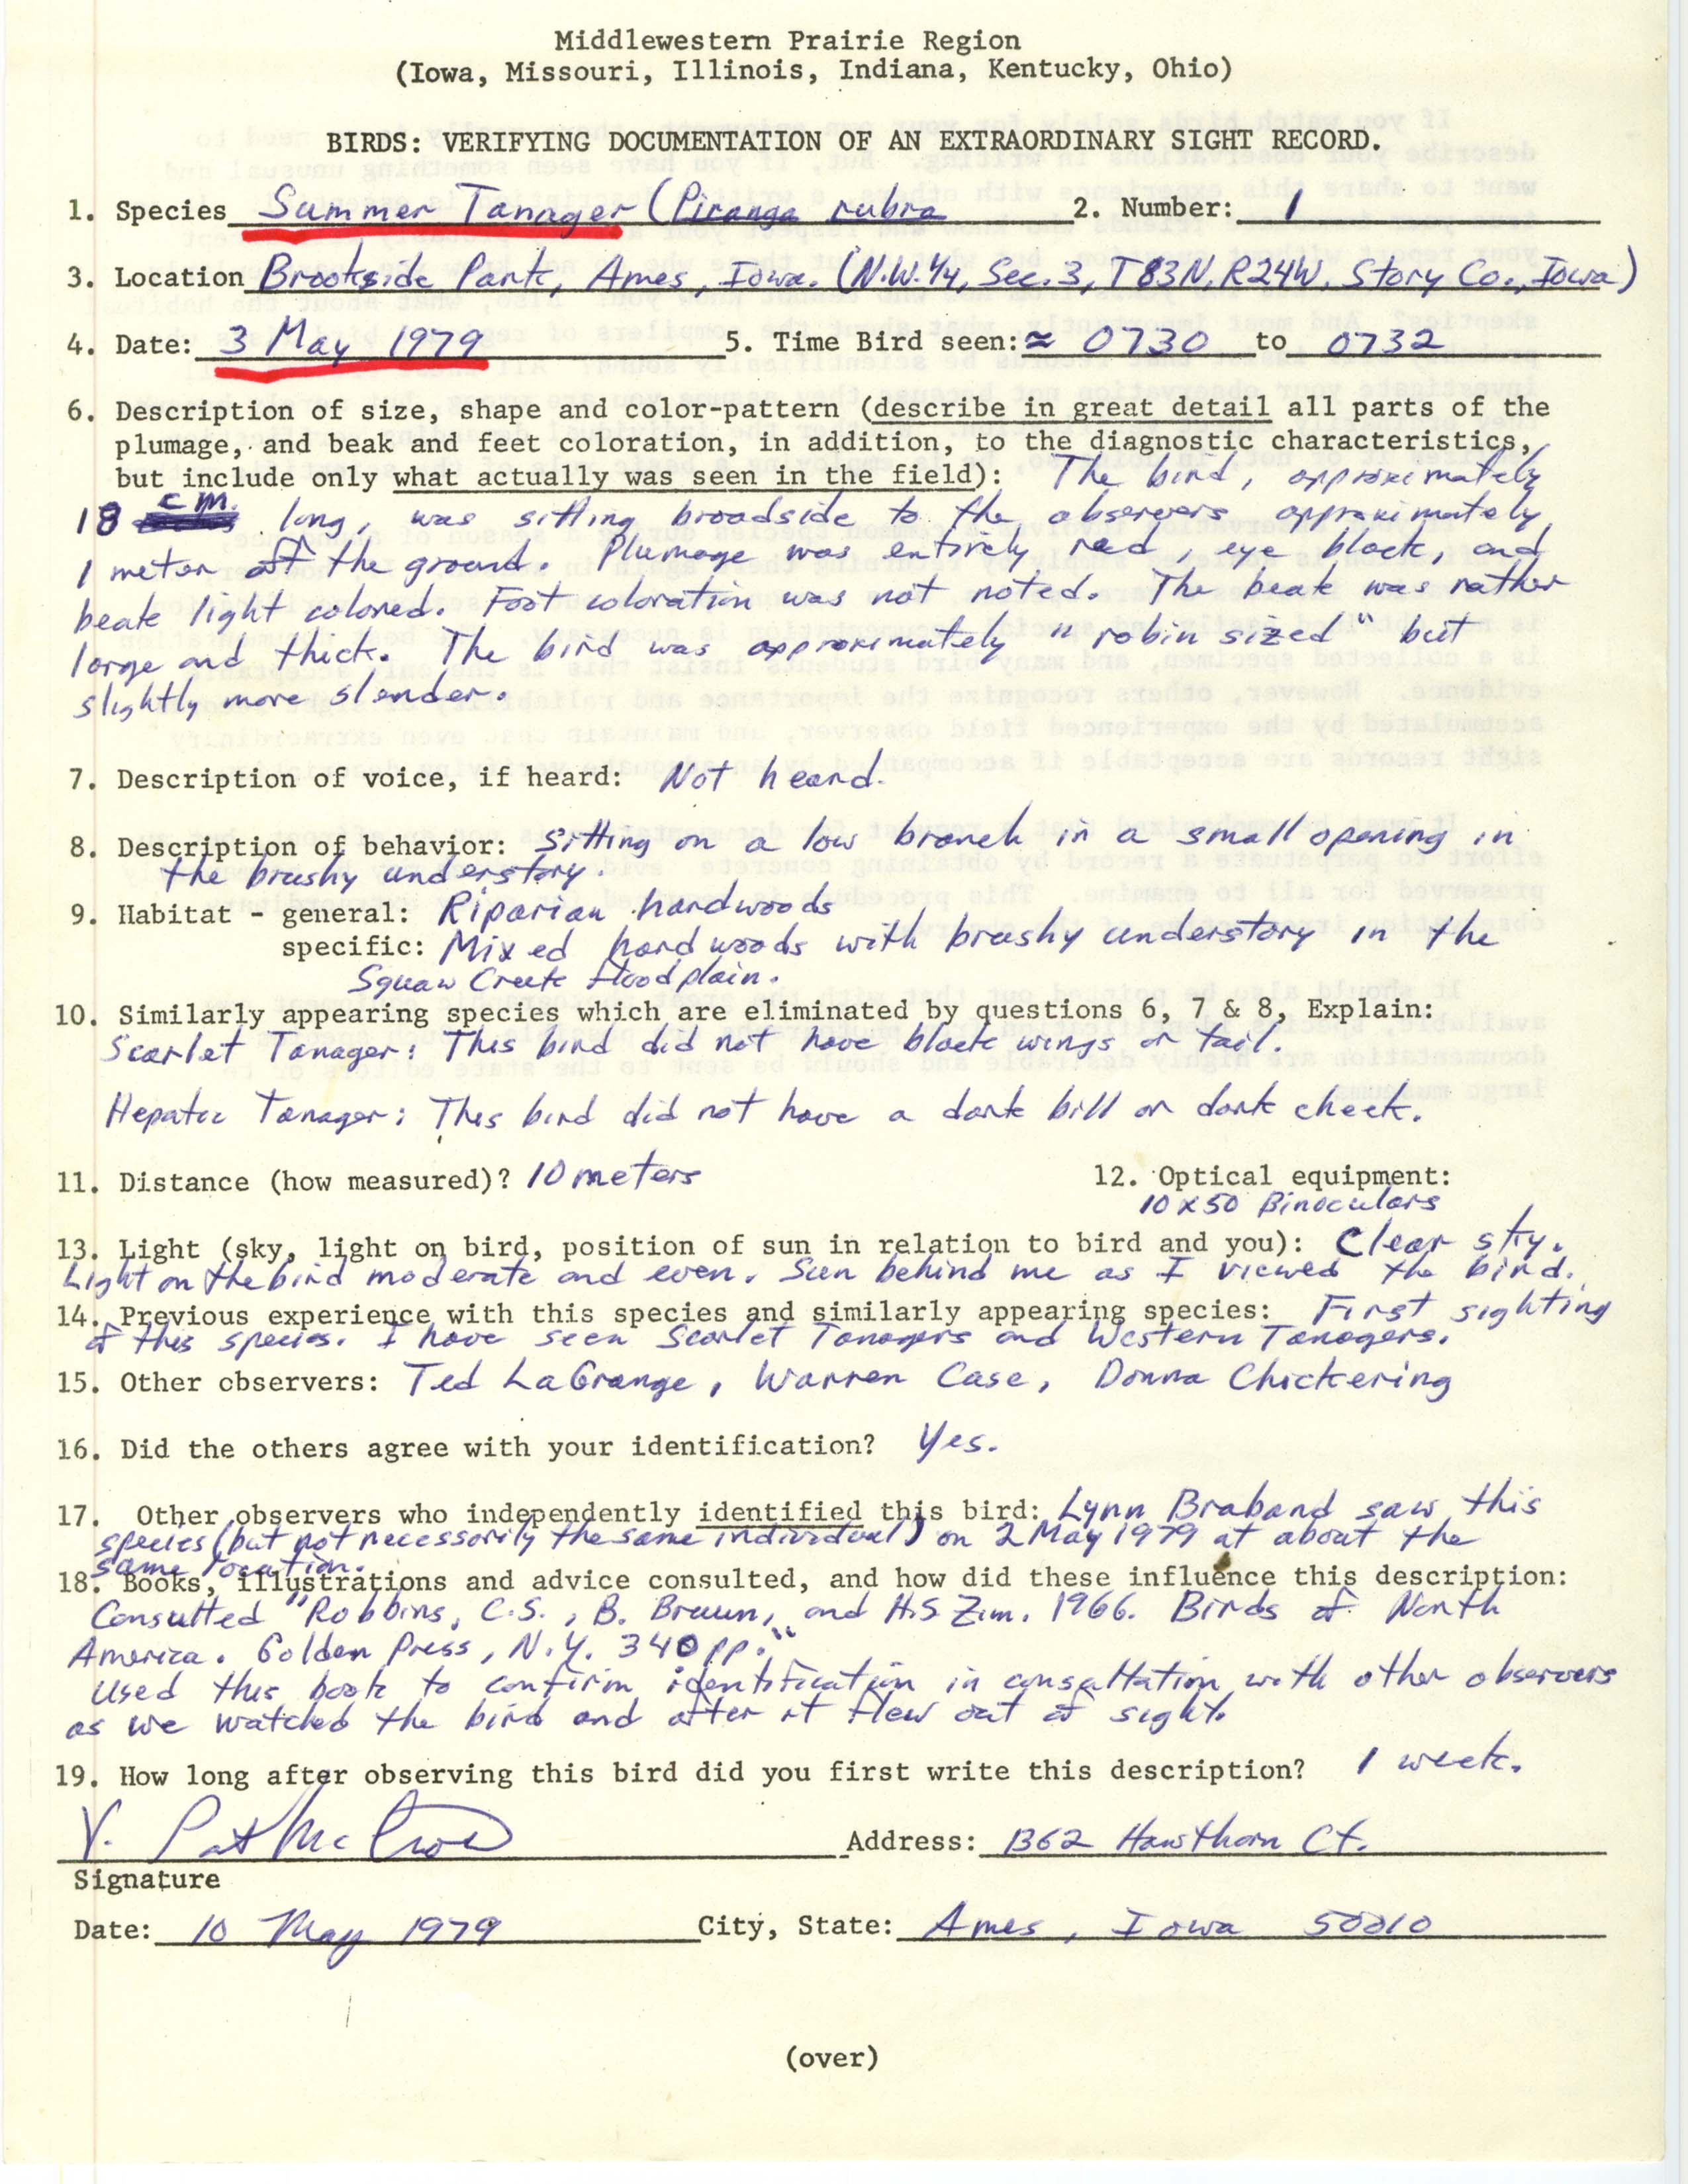 Rare bird documentation form for Summer Tanager at Brookside Park in Ames, 1979